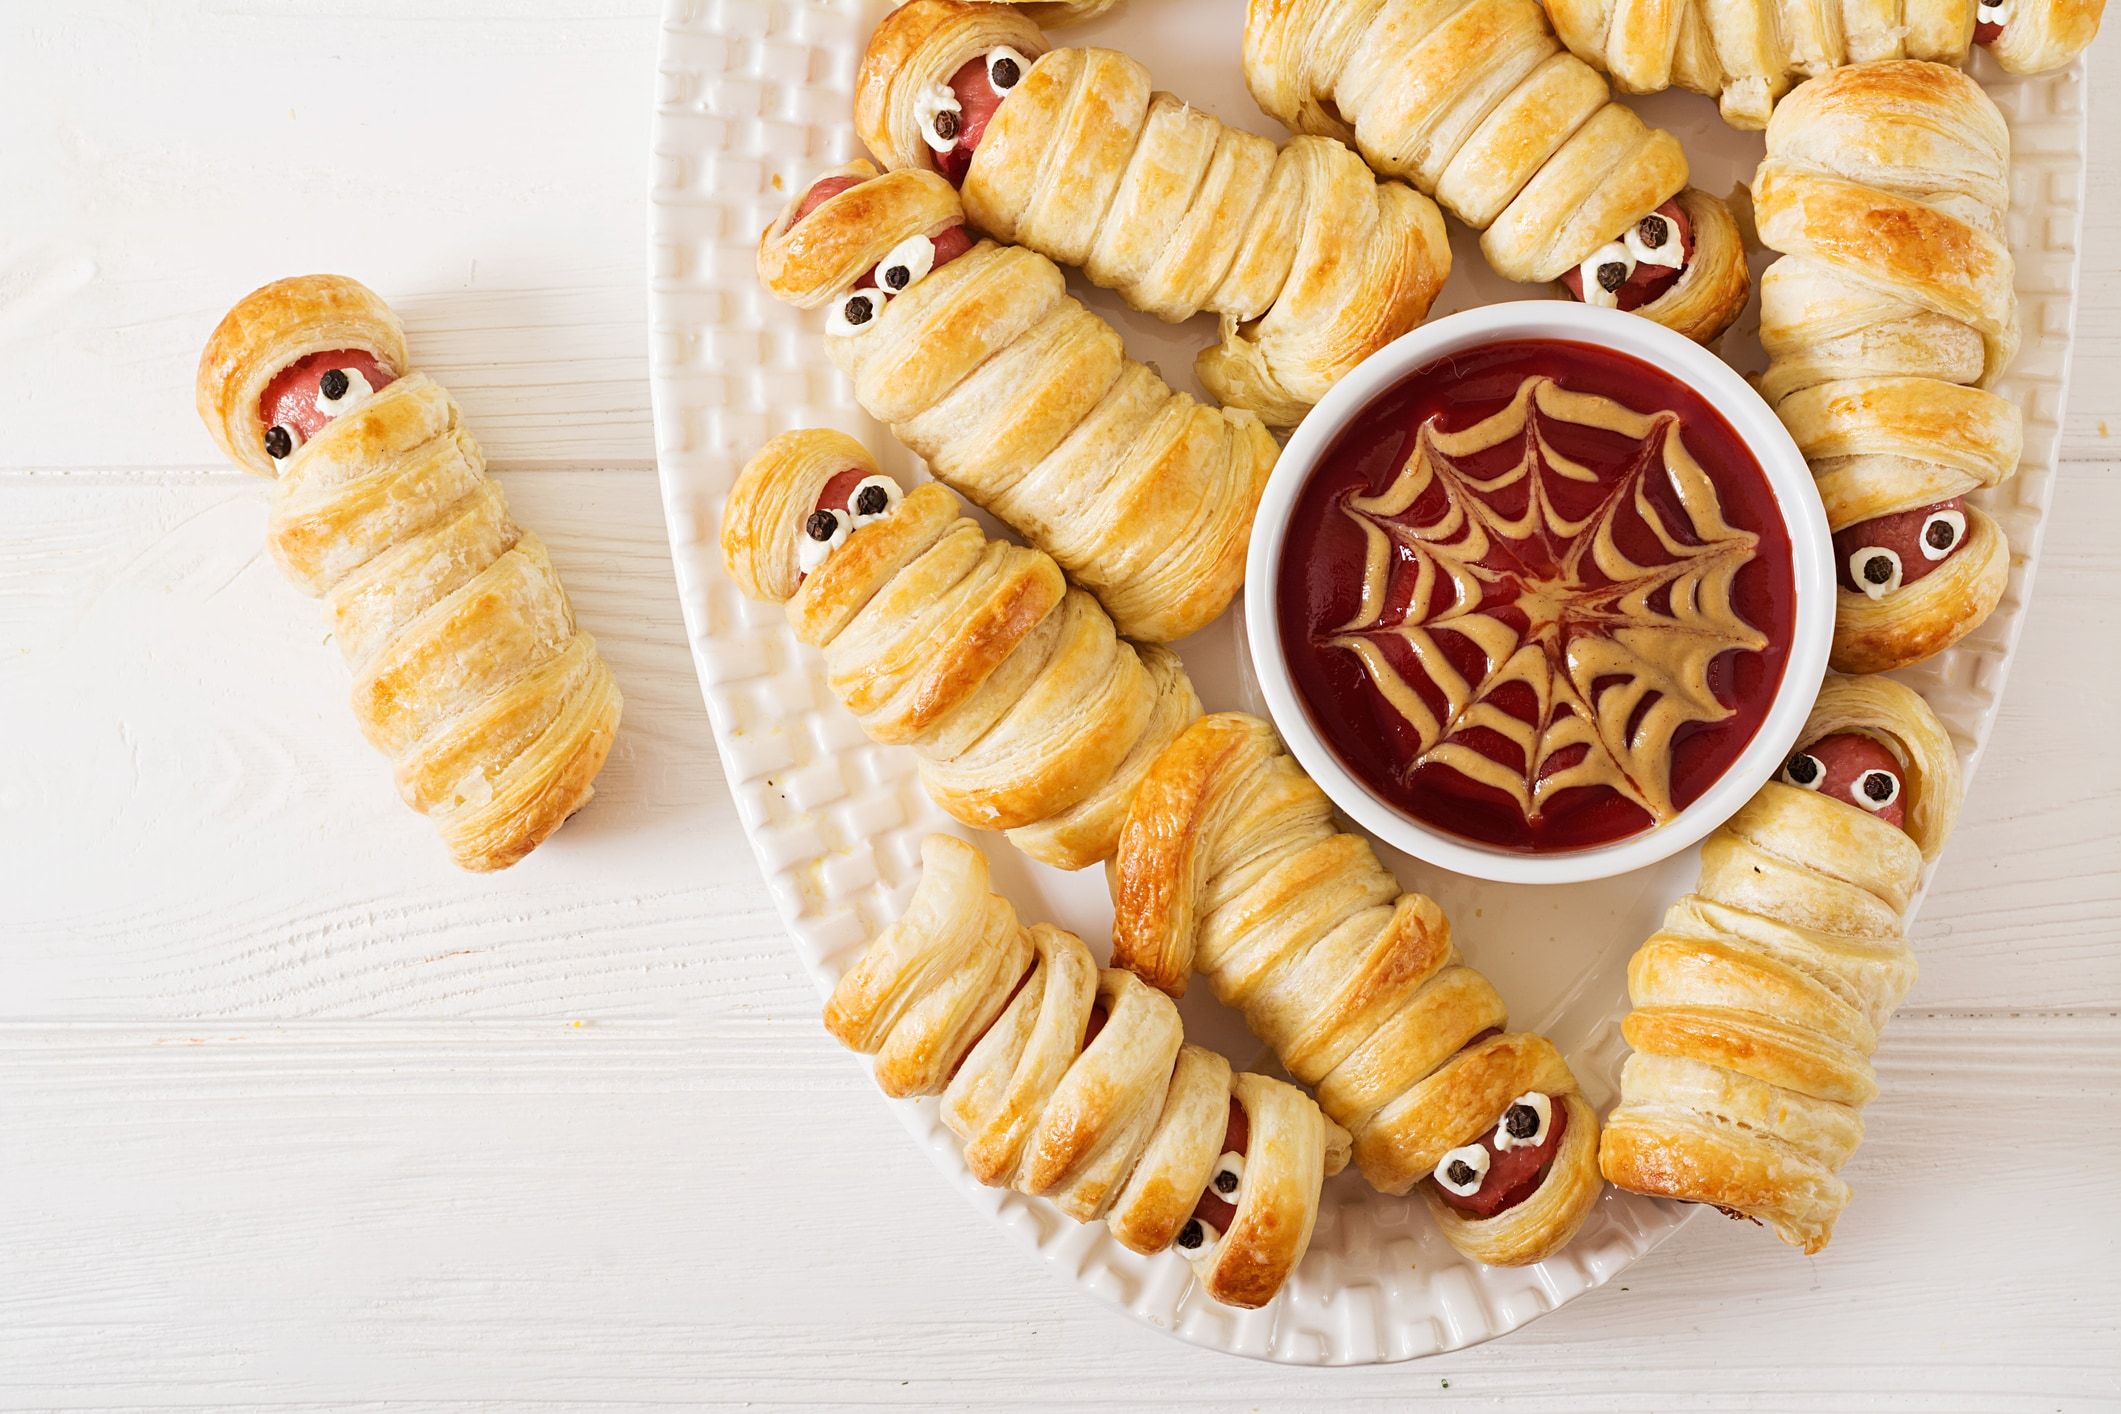 19 Halloween party food ideas kids and the whole family will love